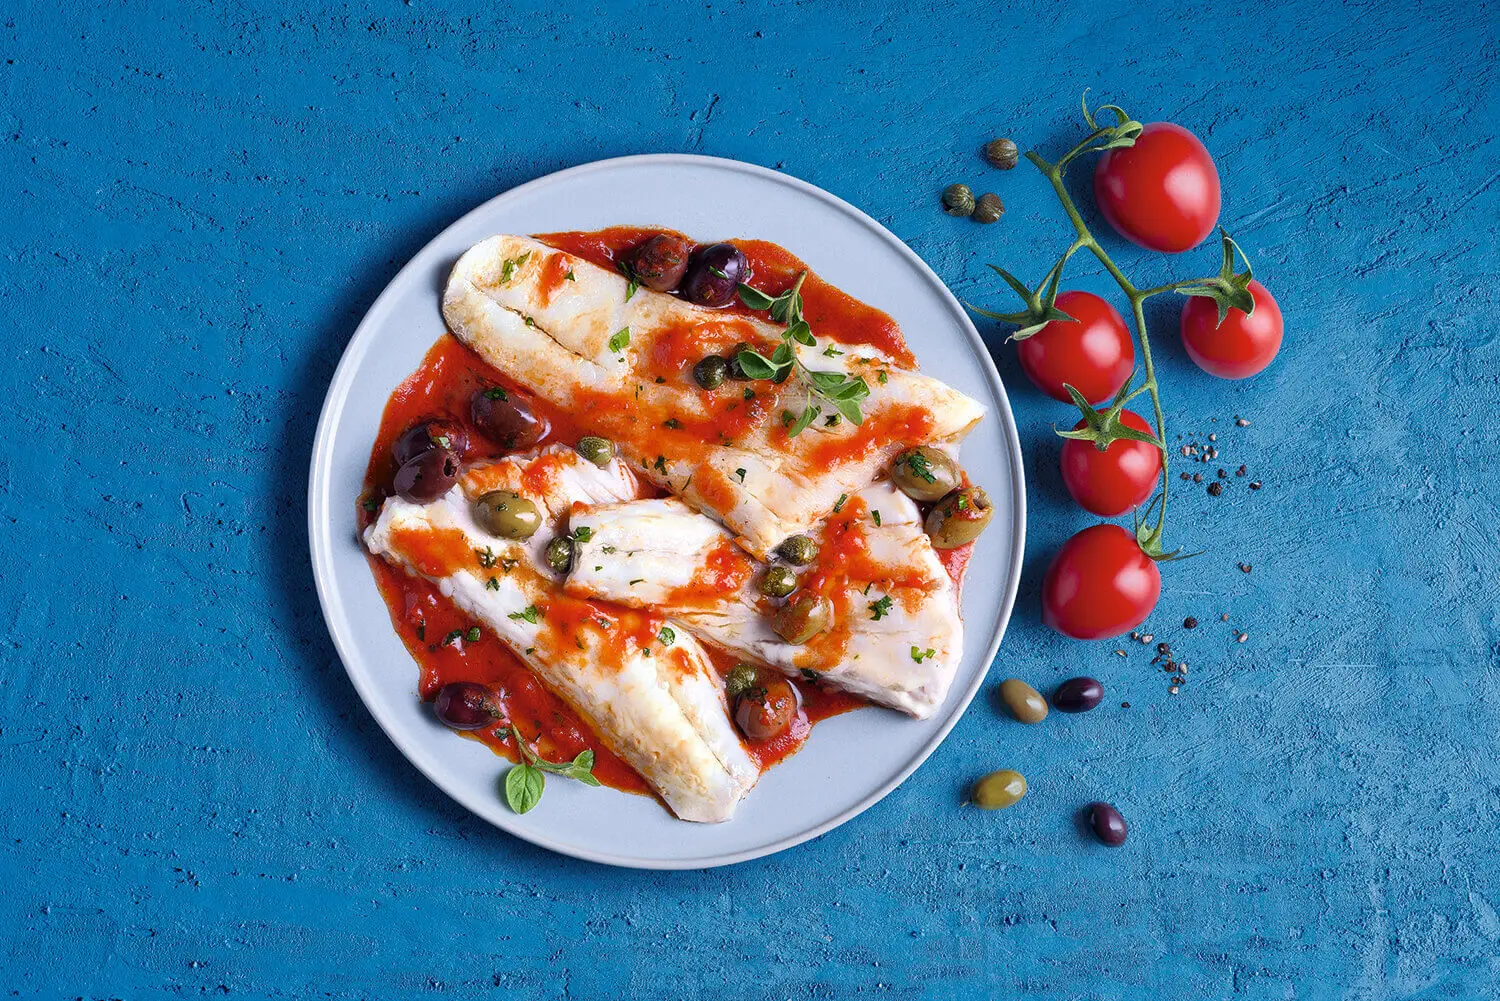 Liguria-style cod with Taggiasche olives and capers